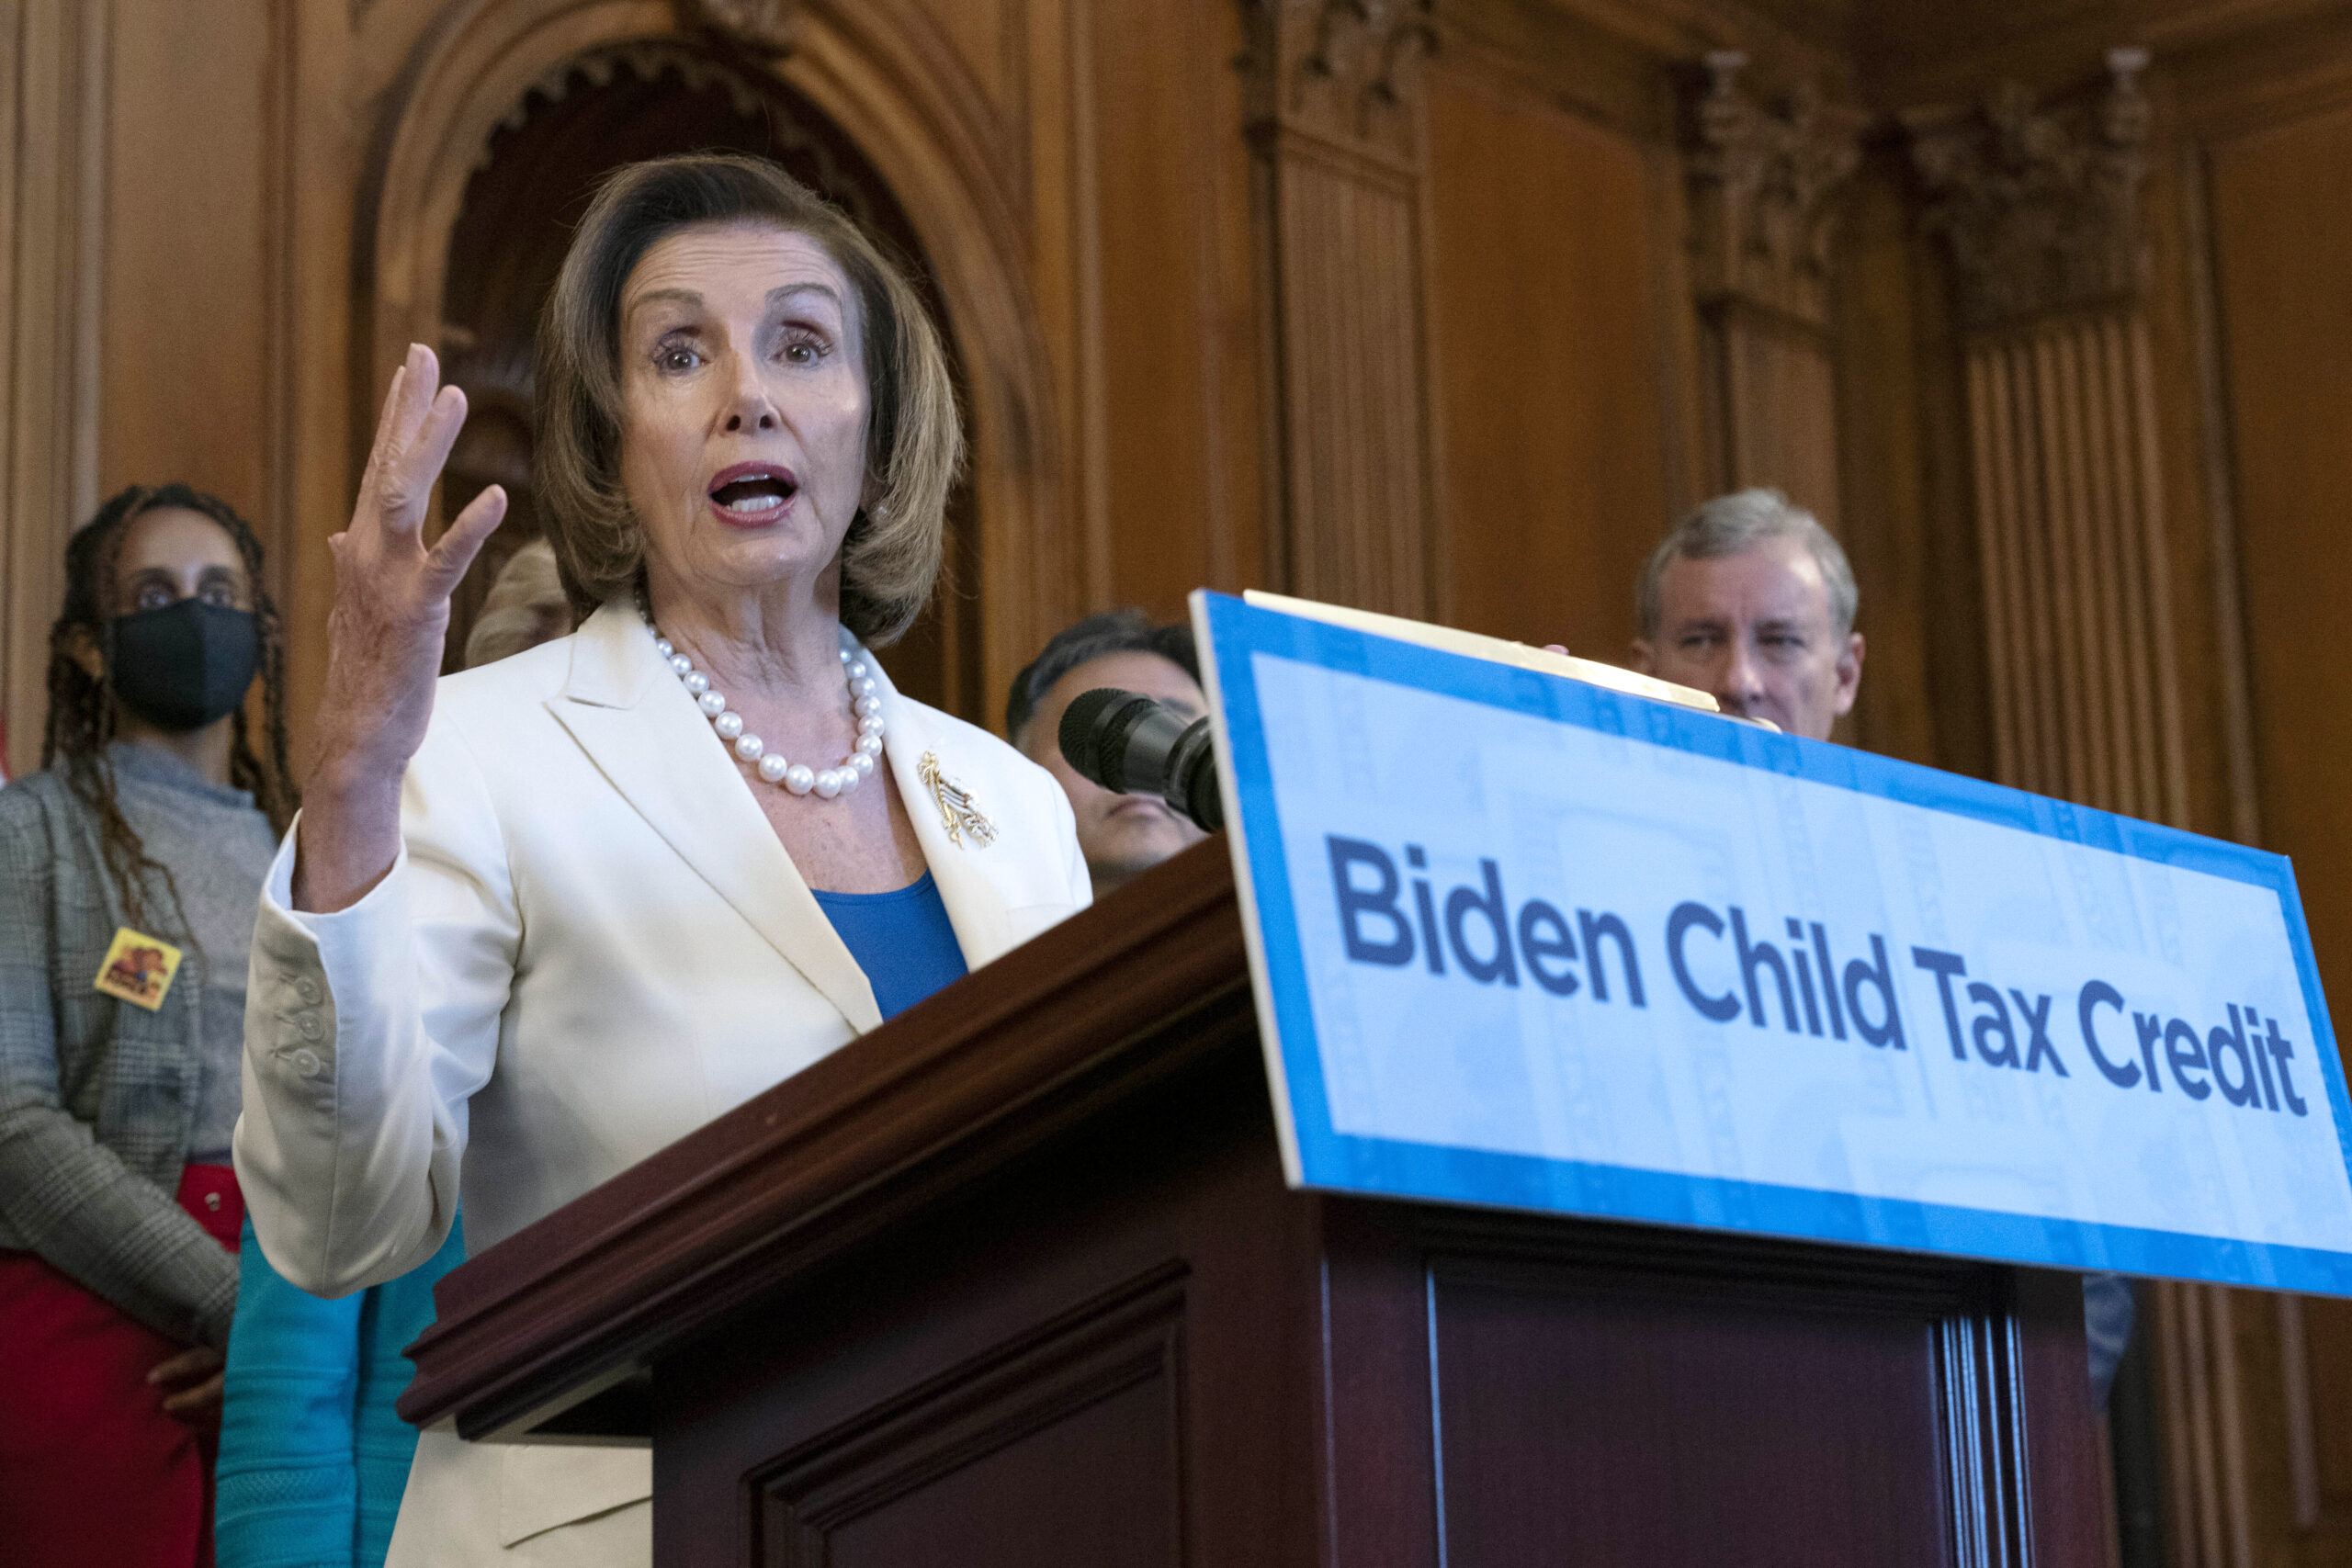 Speaker of the House Nancy Pelosi, D-Calif., speaks during Biden Child Tax Credit news conference, on Capitol Hill in Washington, Tuesday, July 20, 2021. (AP Photo/Jose Luis Magana)